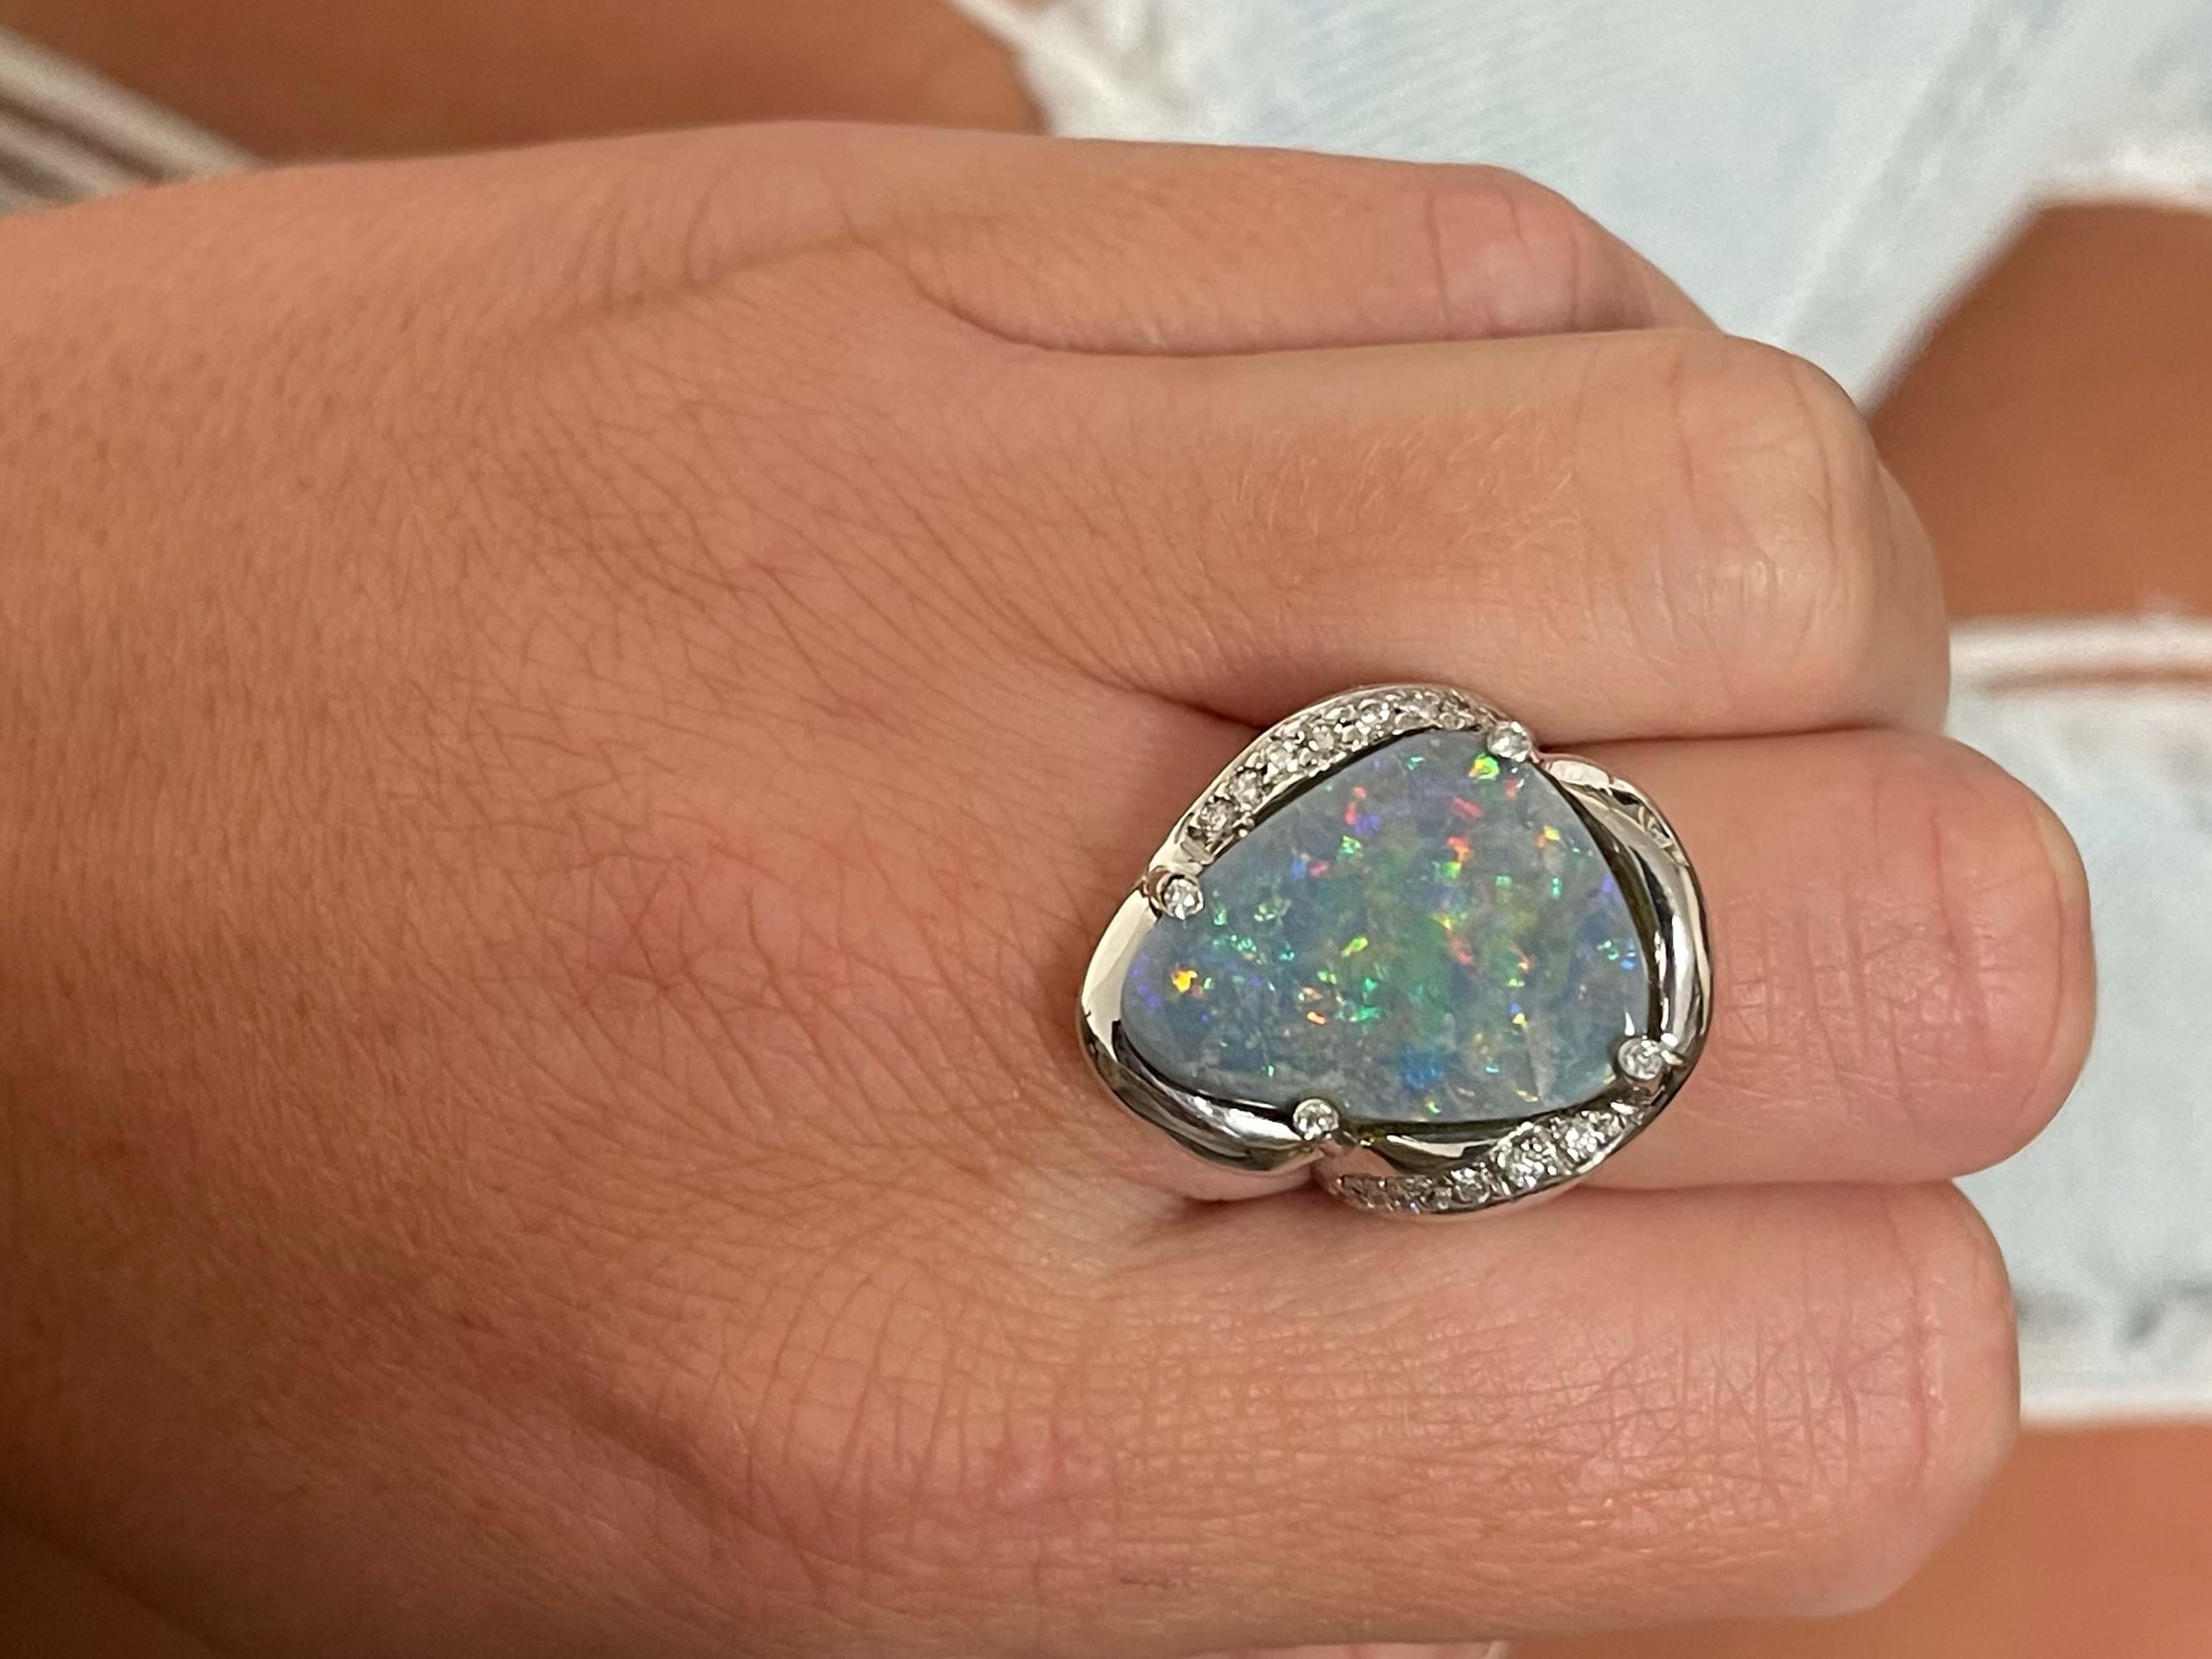 Item Specifications:

Metal: 18K White Gold 

Style: Opal and Diamond Ring

Total Weight: 16.10 Grams

Gemstone Specifications:

Center Gemstone: Black Opal

Gemstone Measurements: 19.81 mm x 15.14 mm x 5.31 mm

Gemstone Carat Weight: ~5